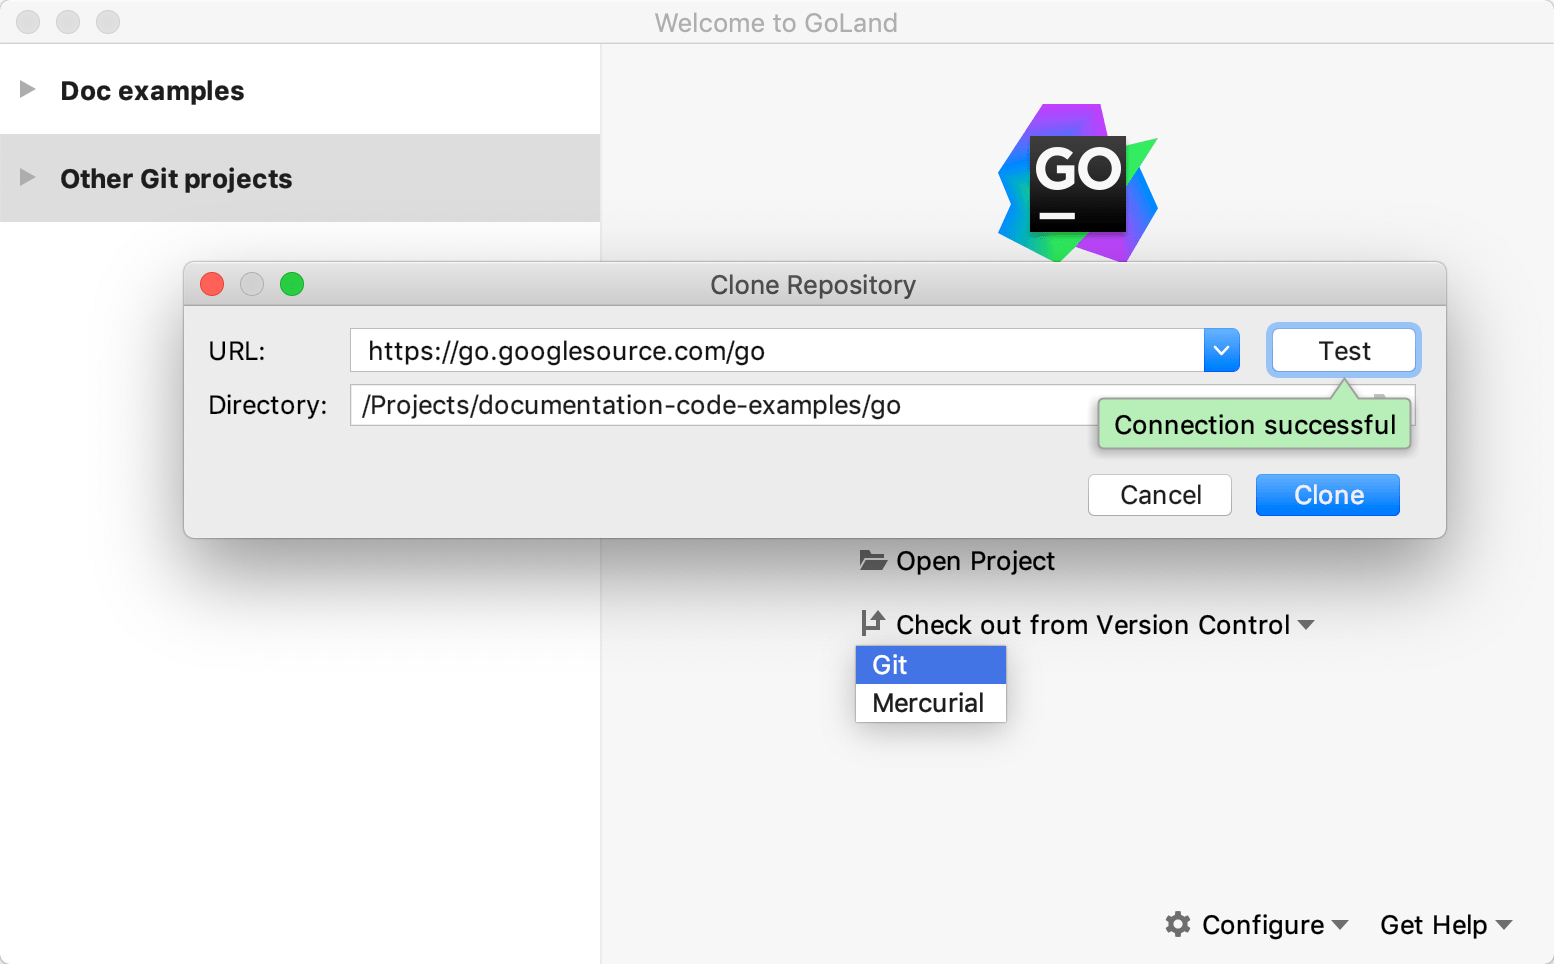 Step 1. Clone the Go sources